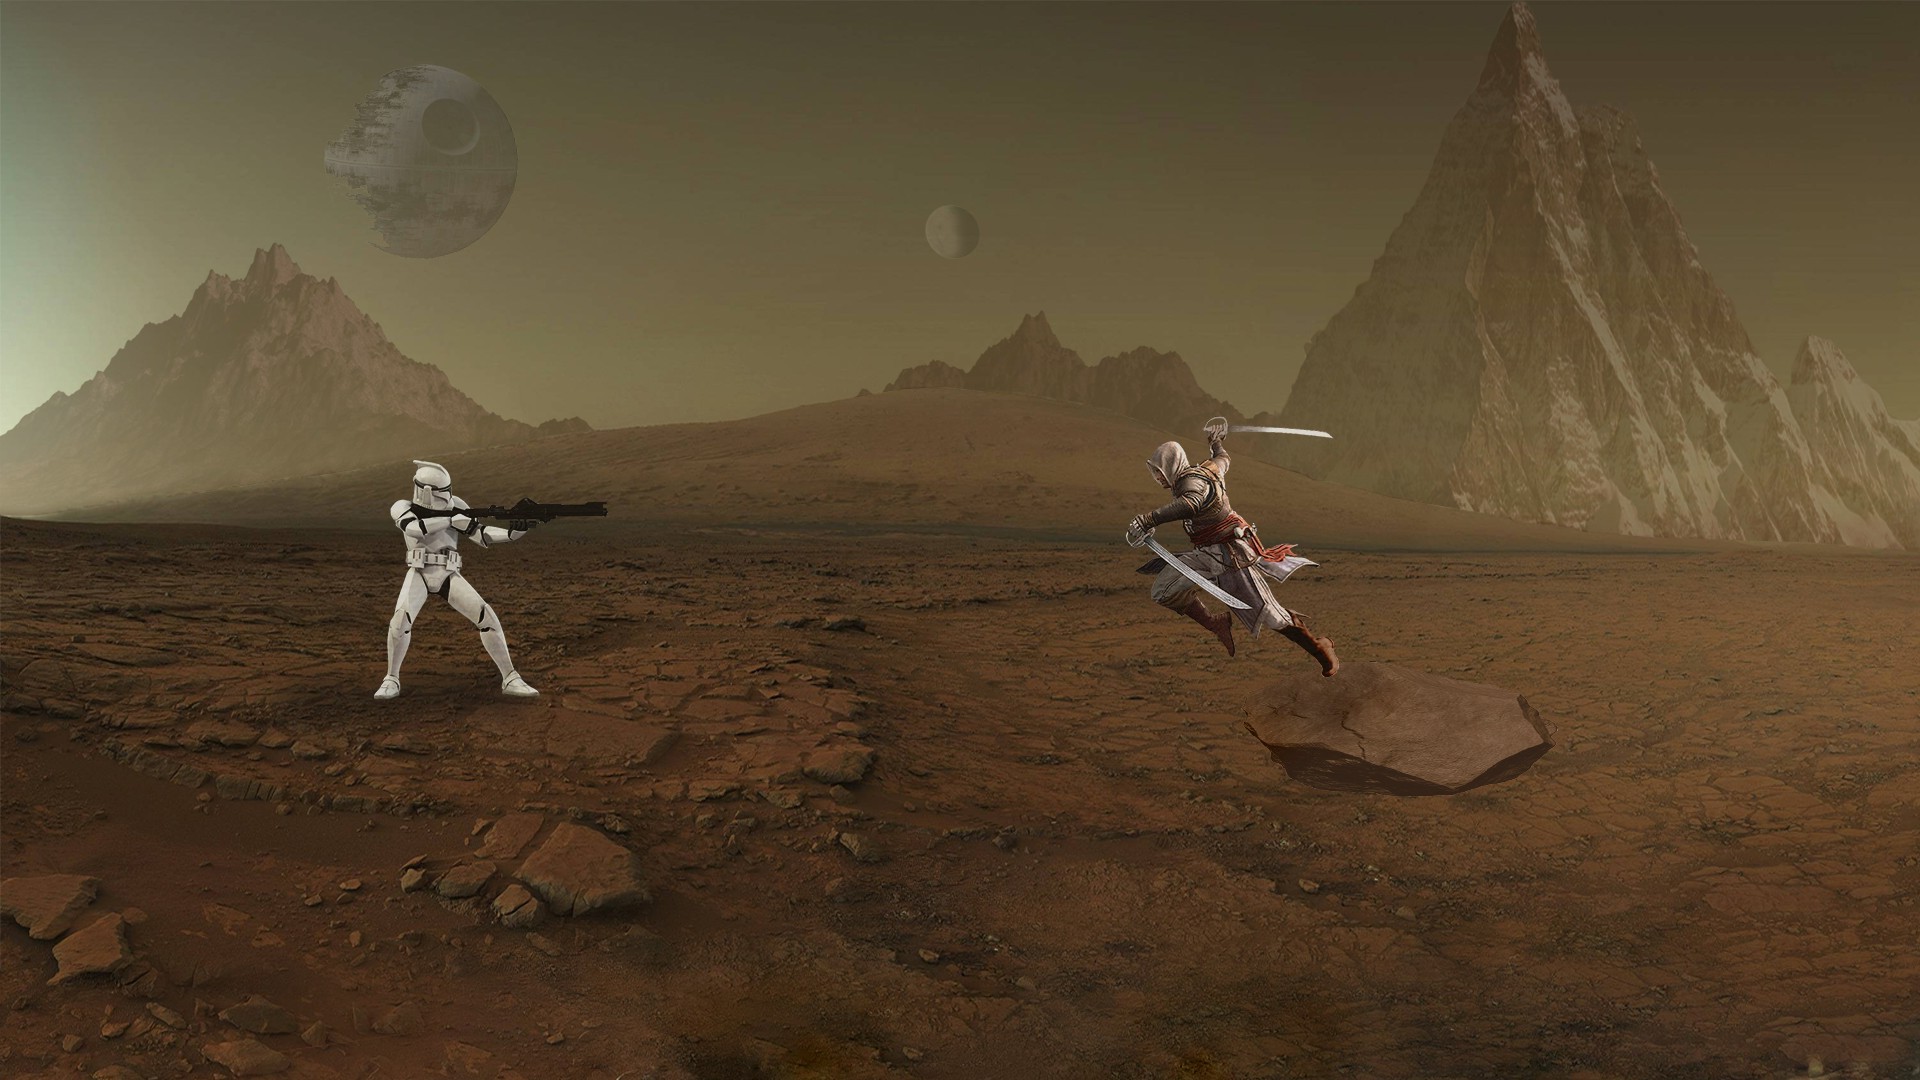 space, Assassins Creed, Clone Trooper, Death Star, Planet, Mars, Sword, Photoshopped Wallpaper